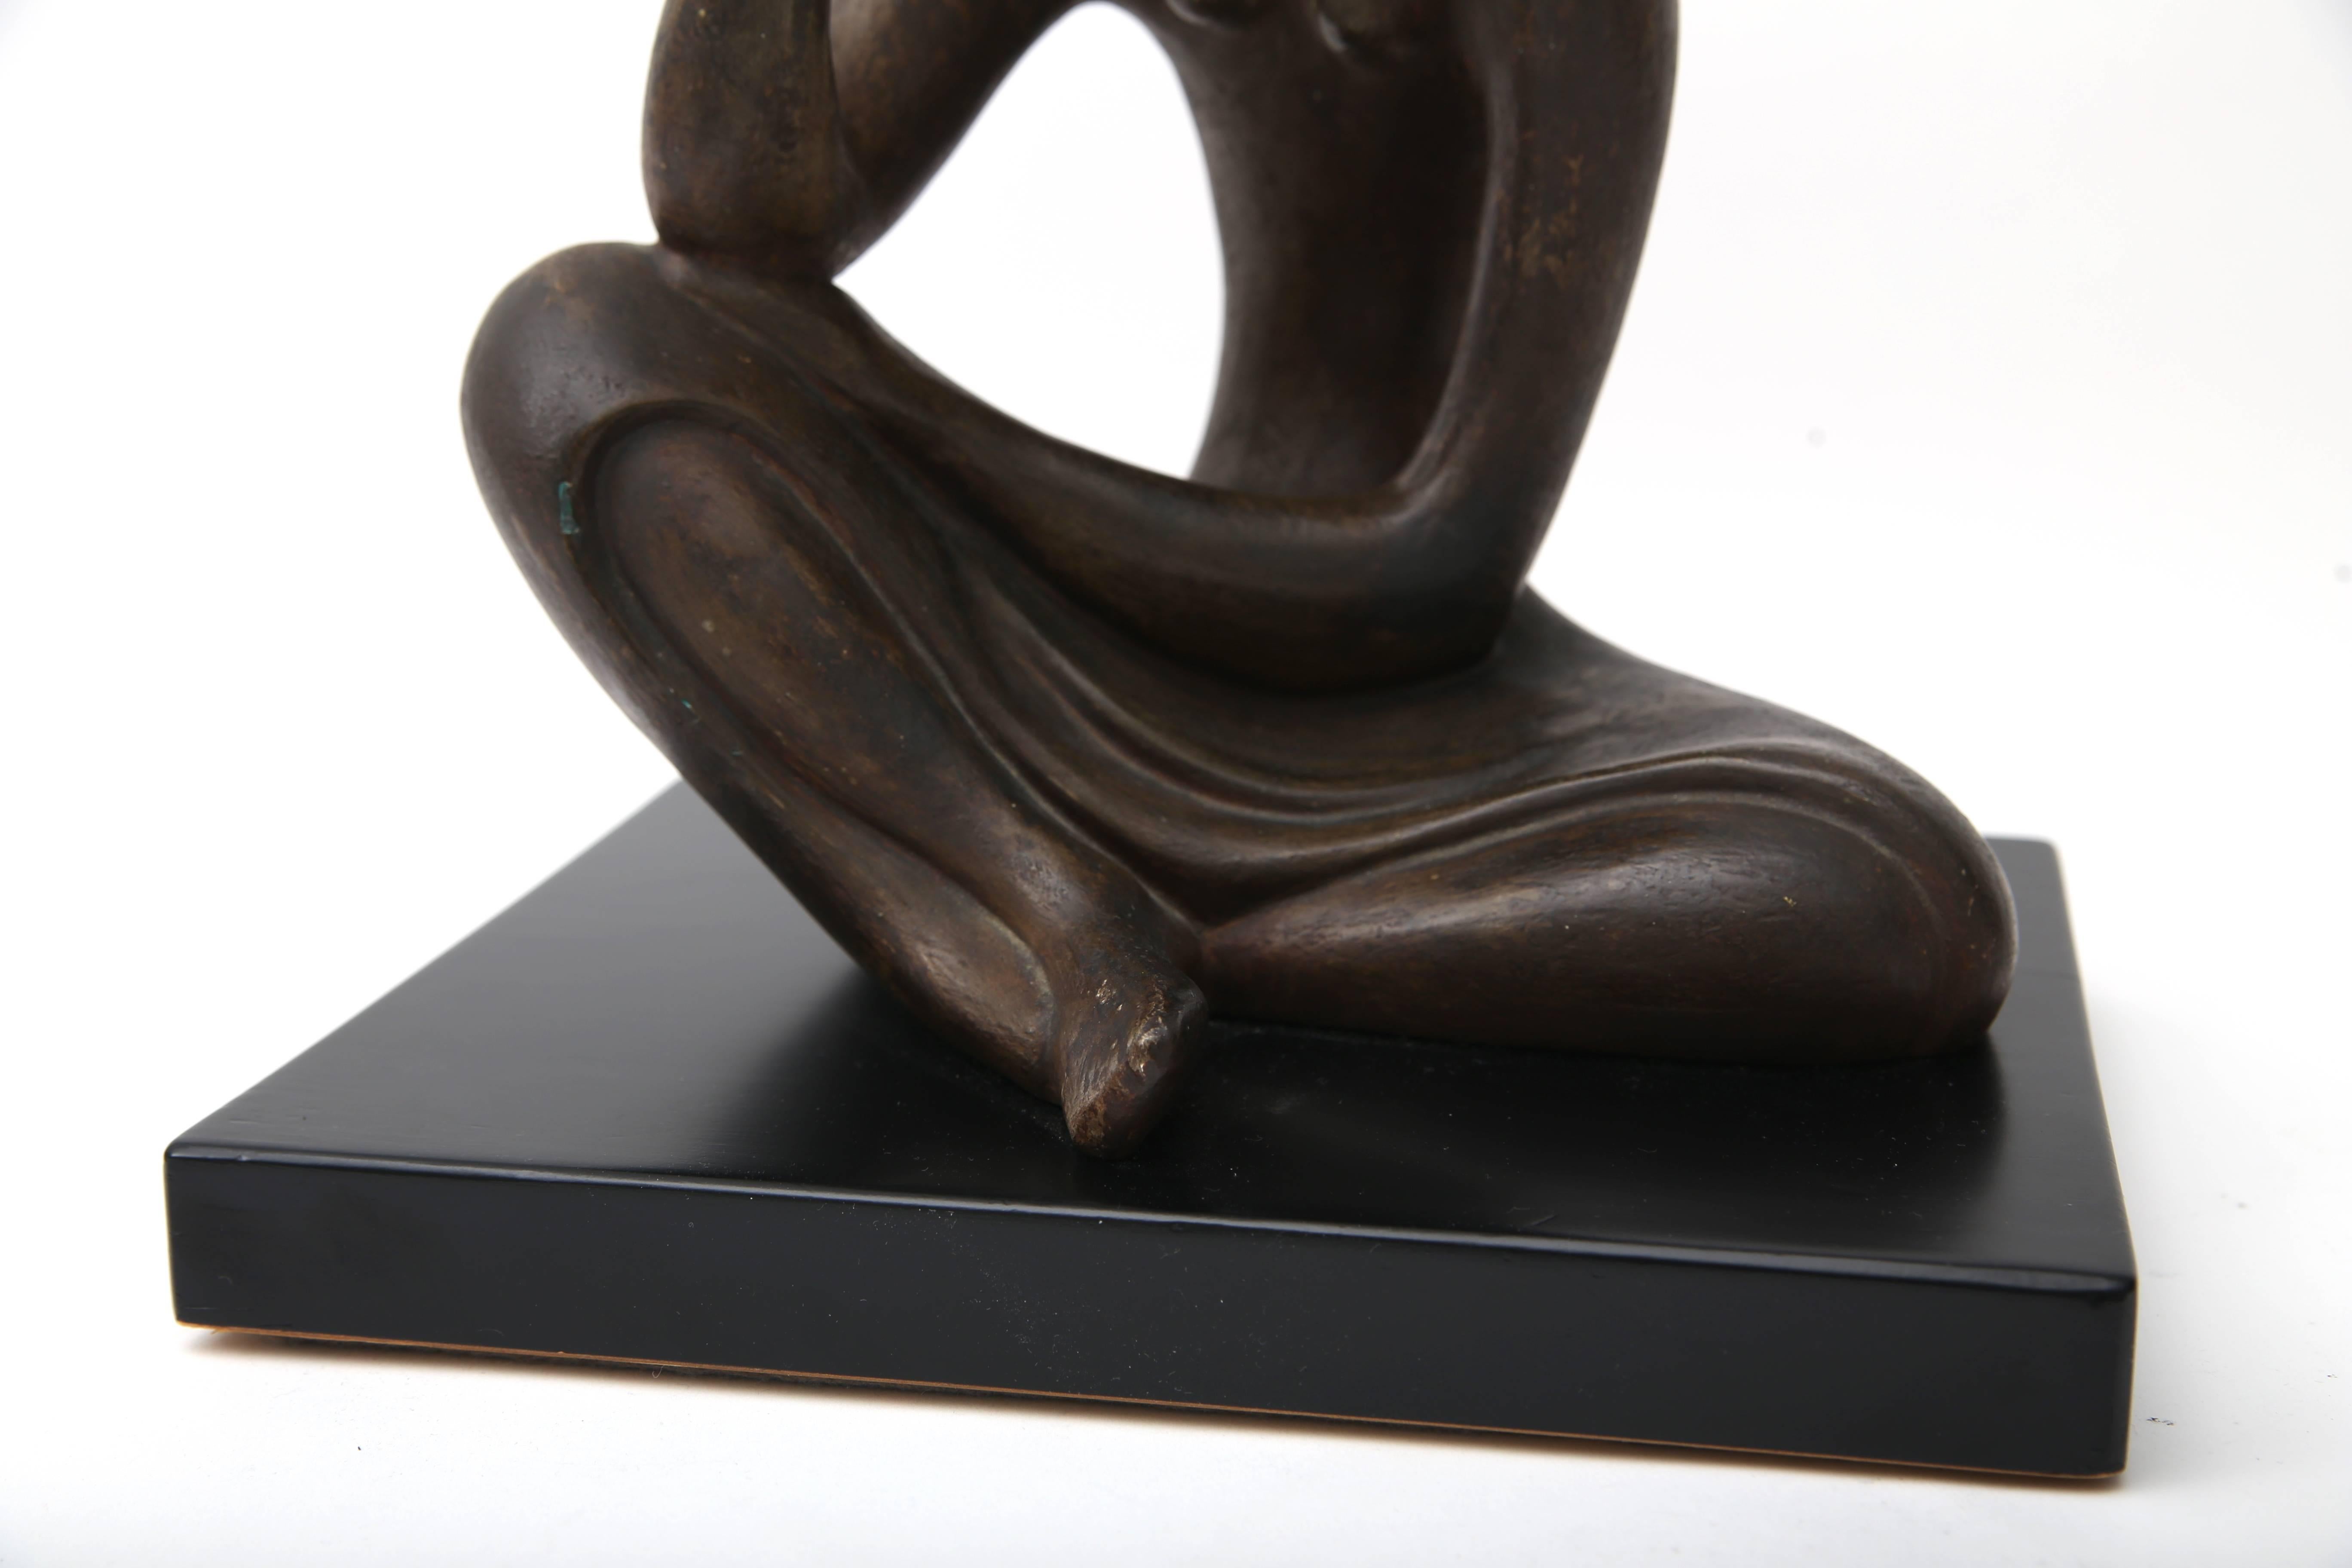 Molded  Sculpture of a Seated Female in Bronze Coloration